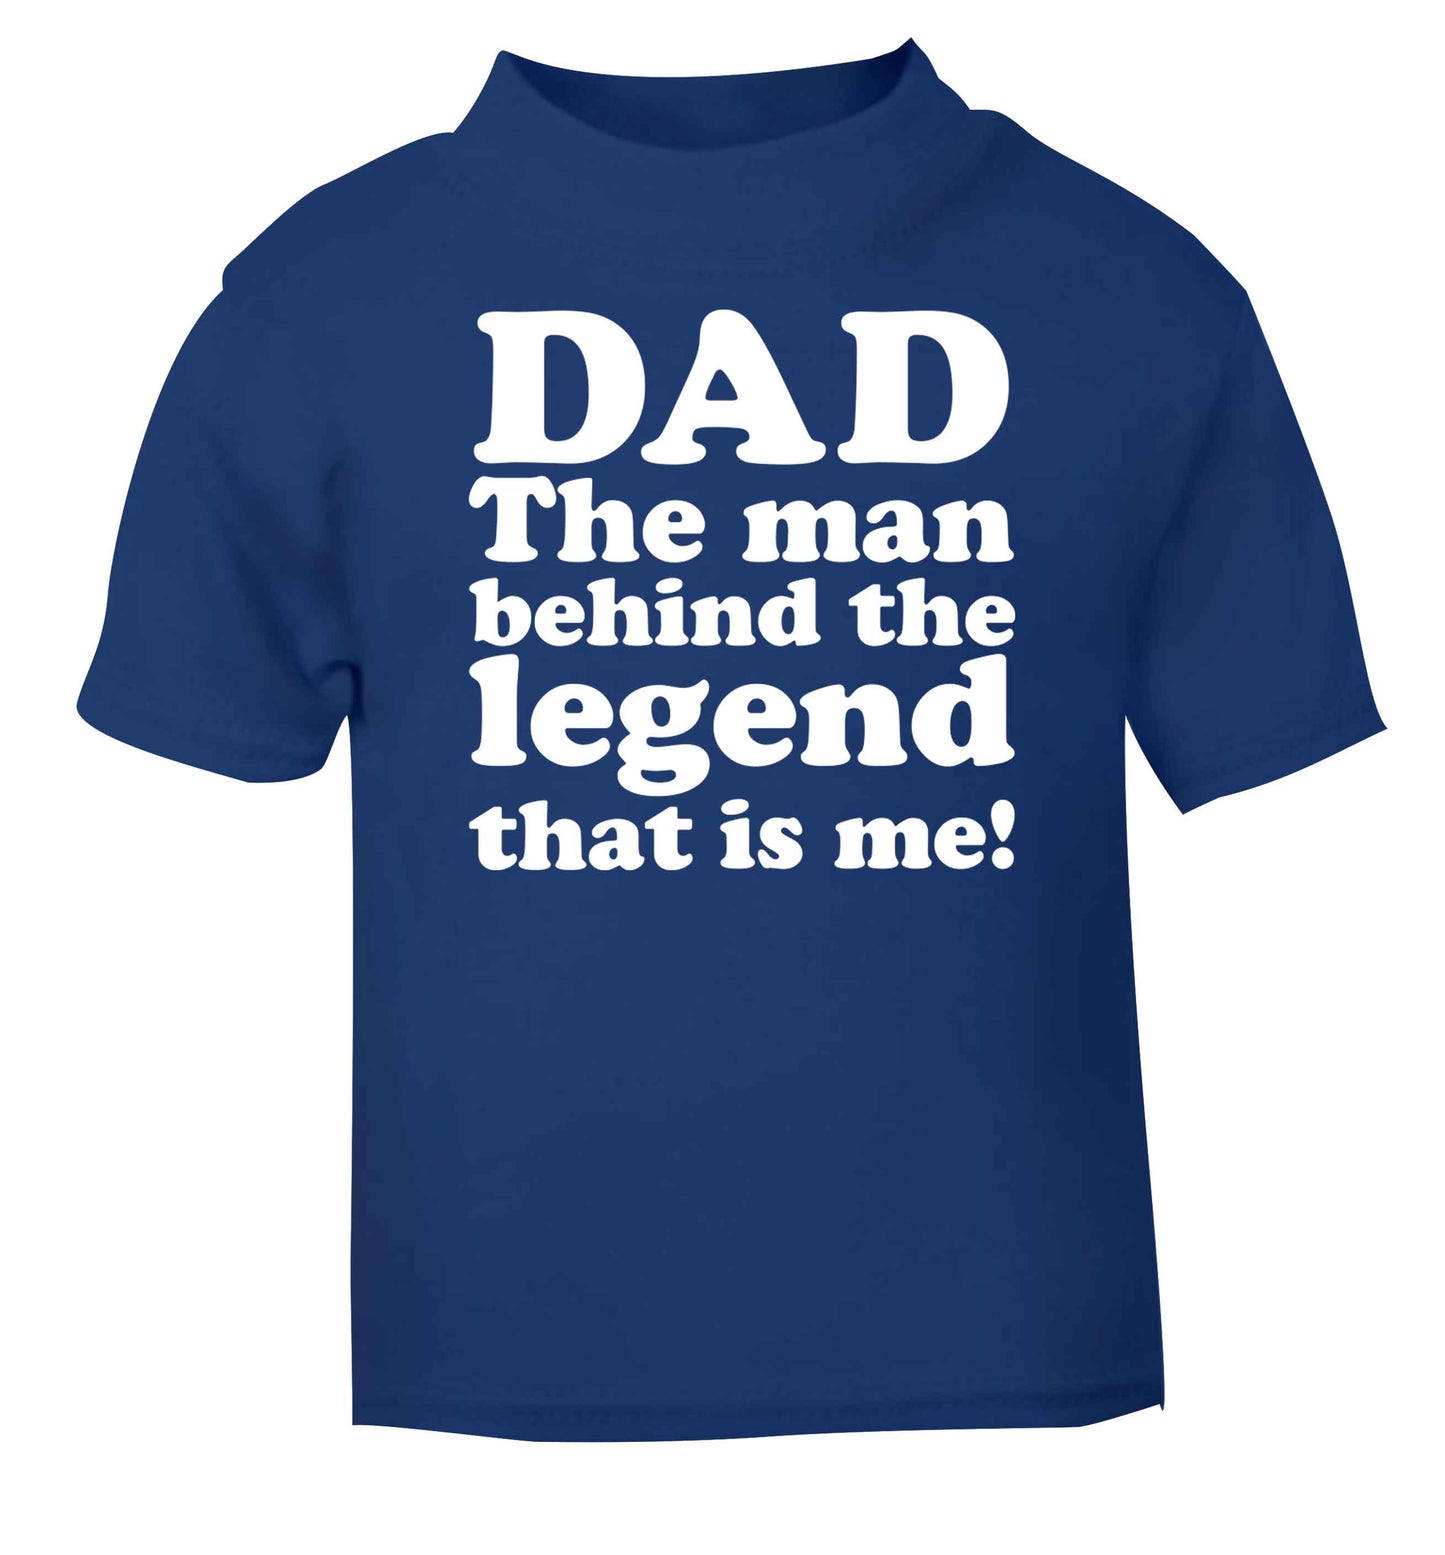 Dad the man behind the legend that is me blue baby toddler Tshirt 2 Years